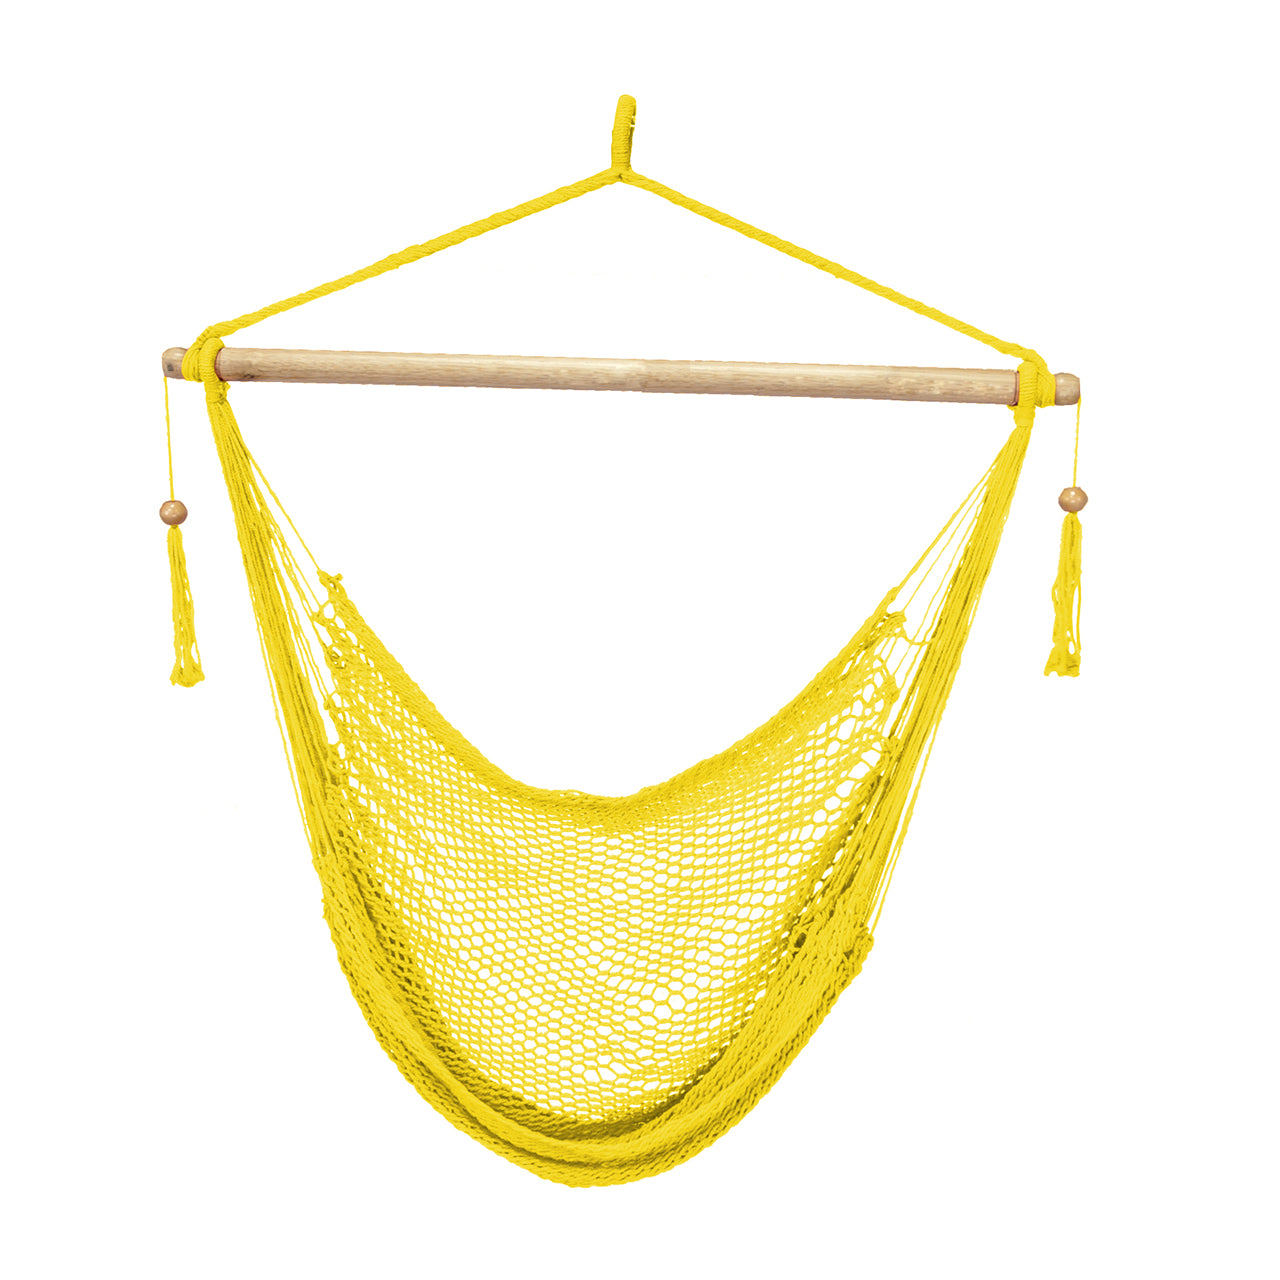 Bliss Hammocks 40-inch Island Rope Hammock Chair with Hanging Hardware and Spreader Bar in the yellow variation.